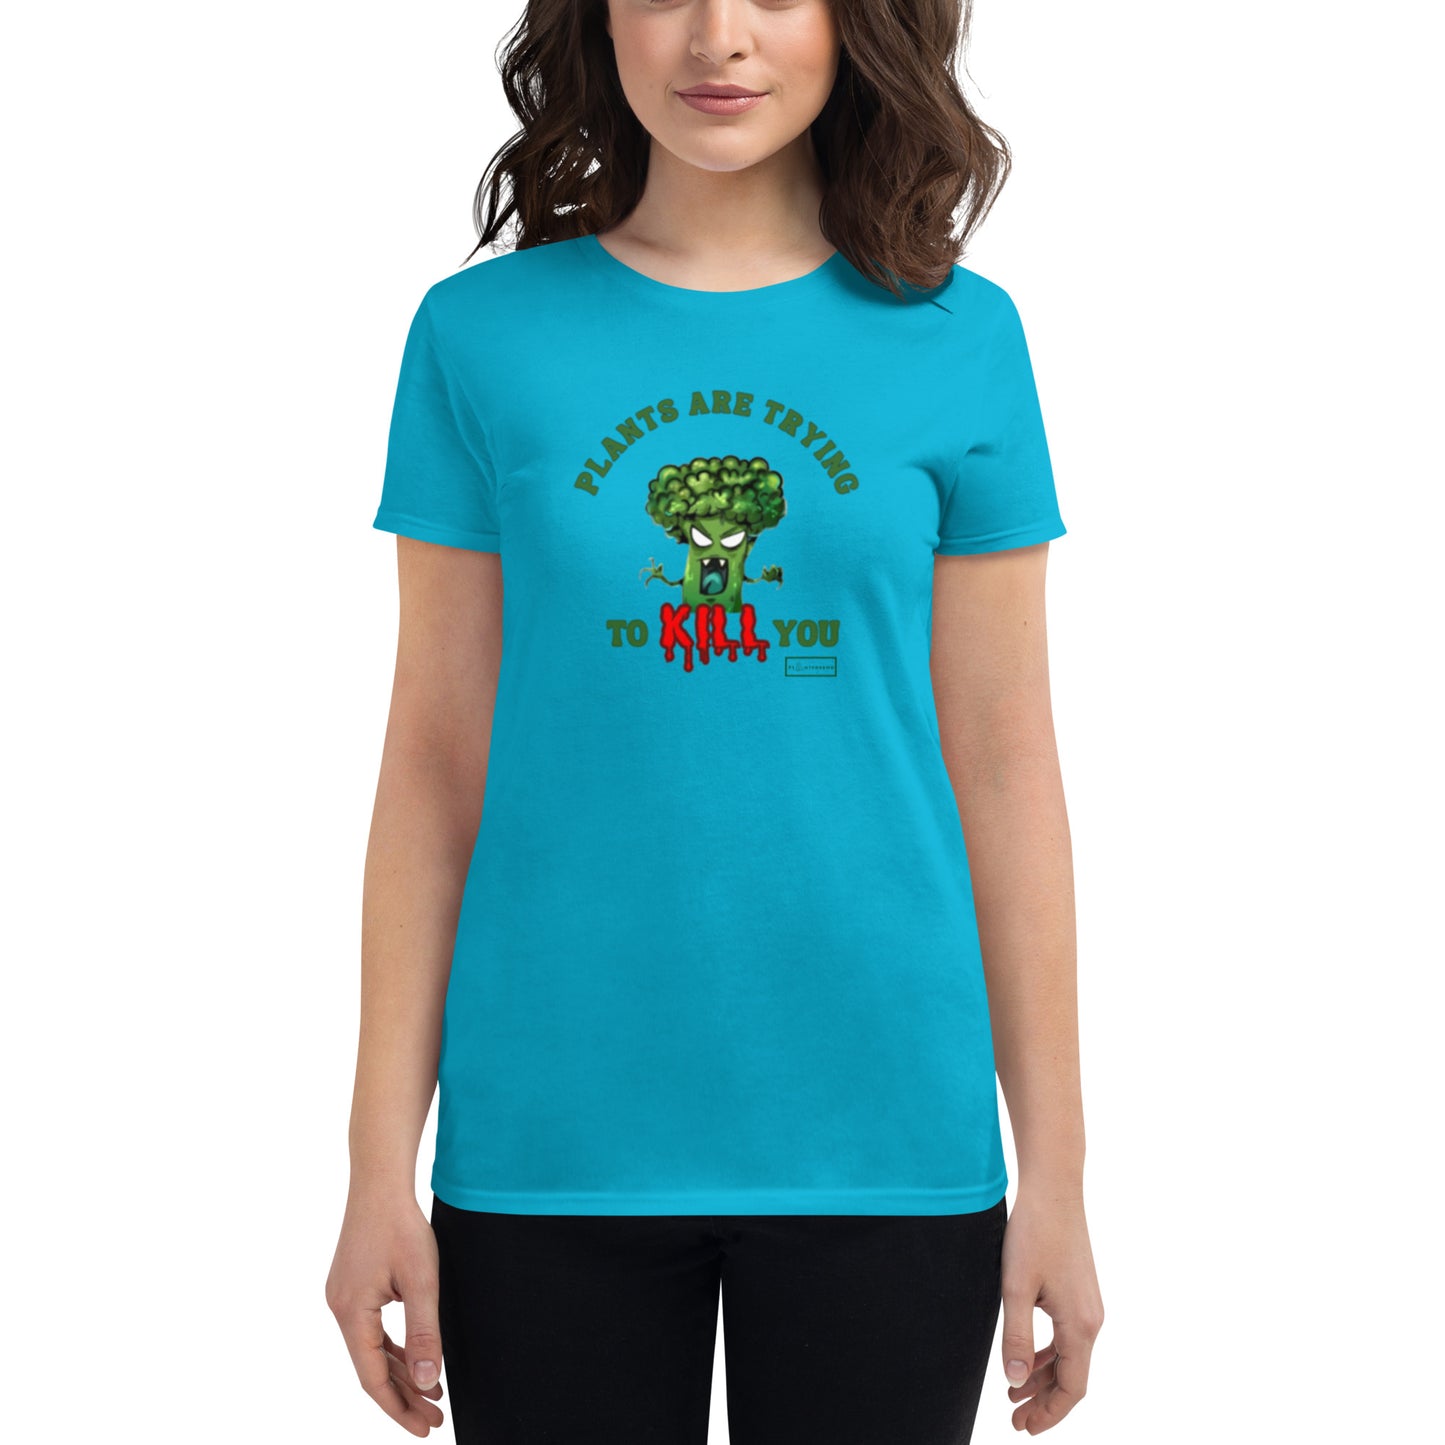 Plants Are Trying to K*ll You Women's Fitted T-shirt